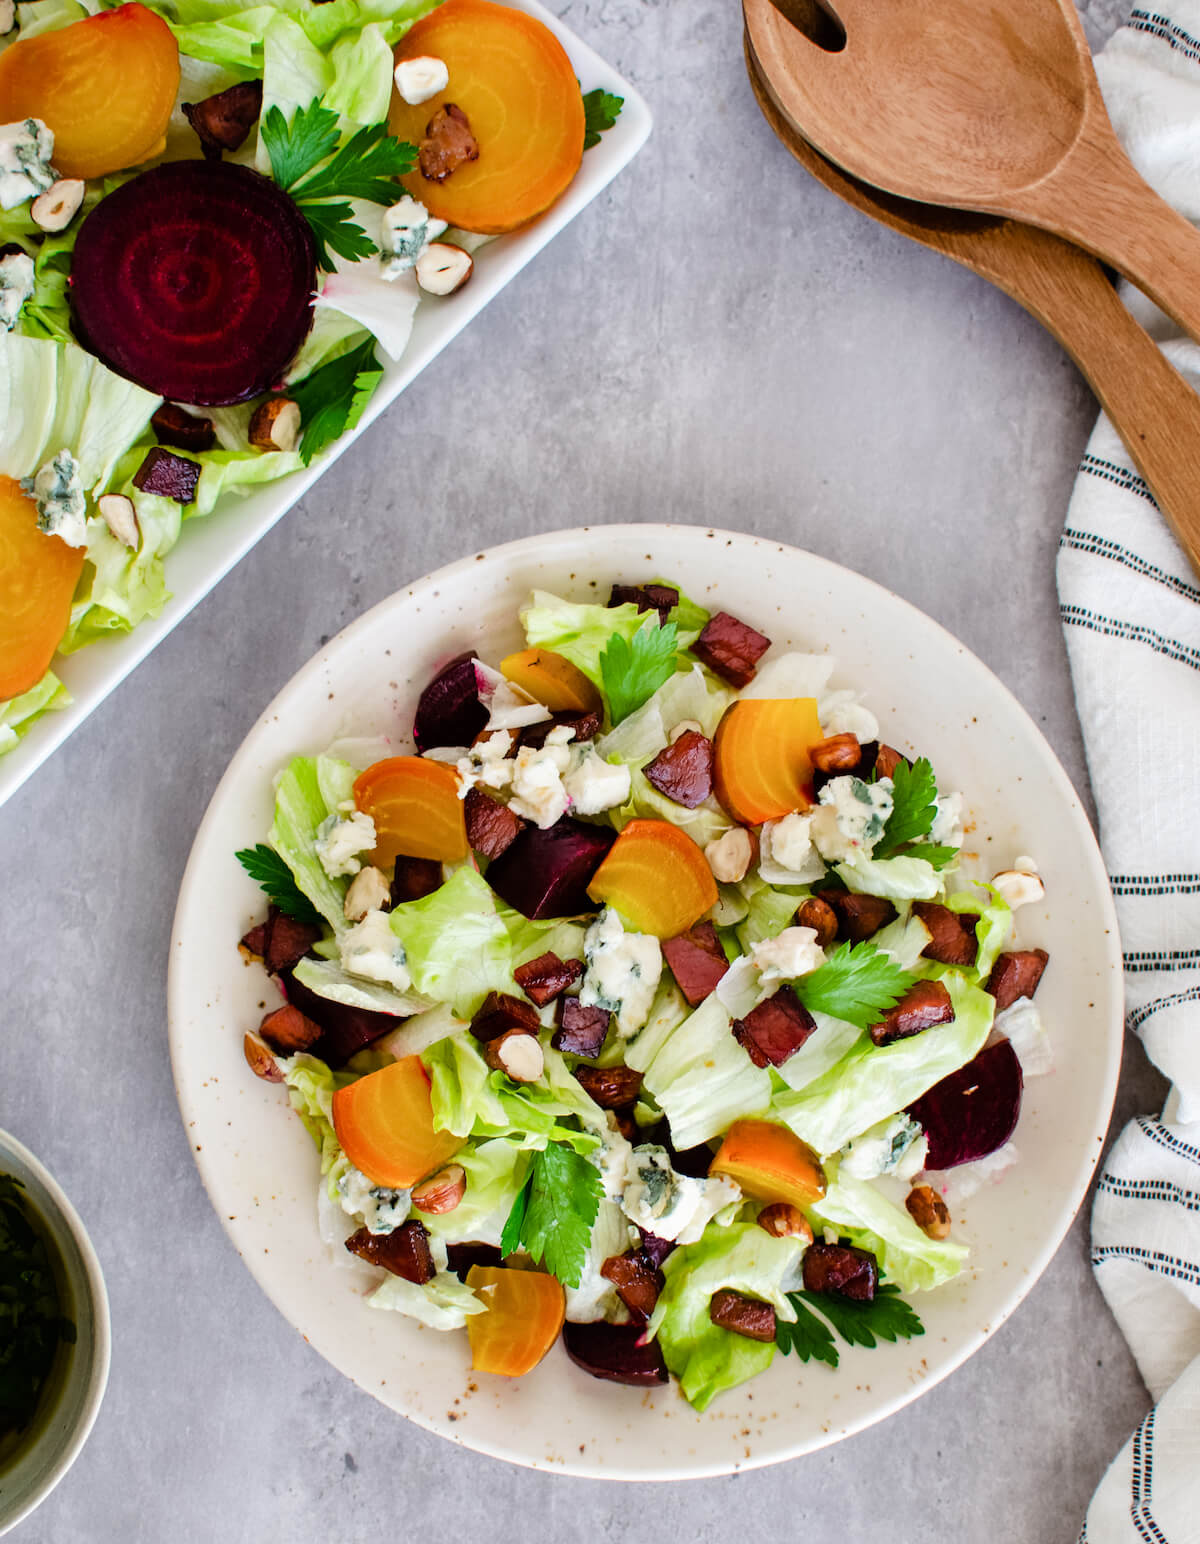 lettuce wedge salad with beets and blue cheese